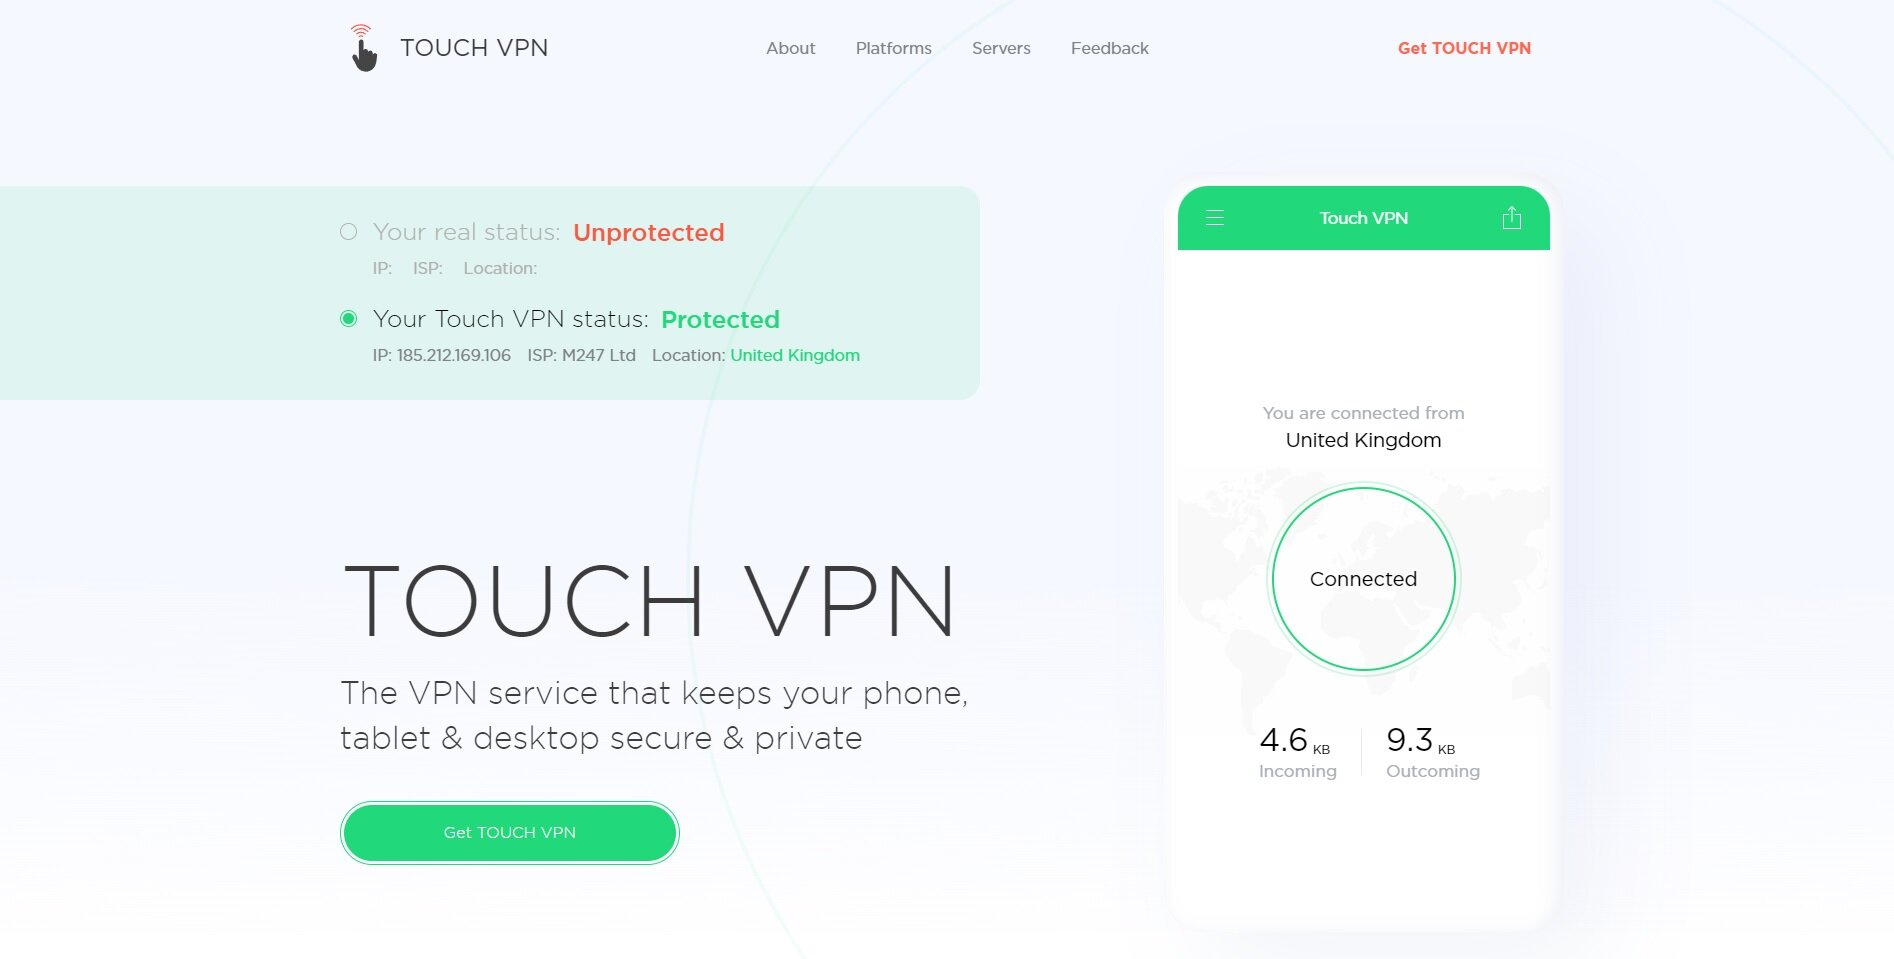 Touchvpn.net – Review and Feedback on the Free VPN Service as a Browser Extension